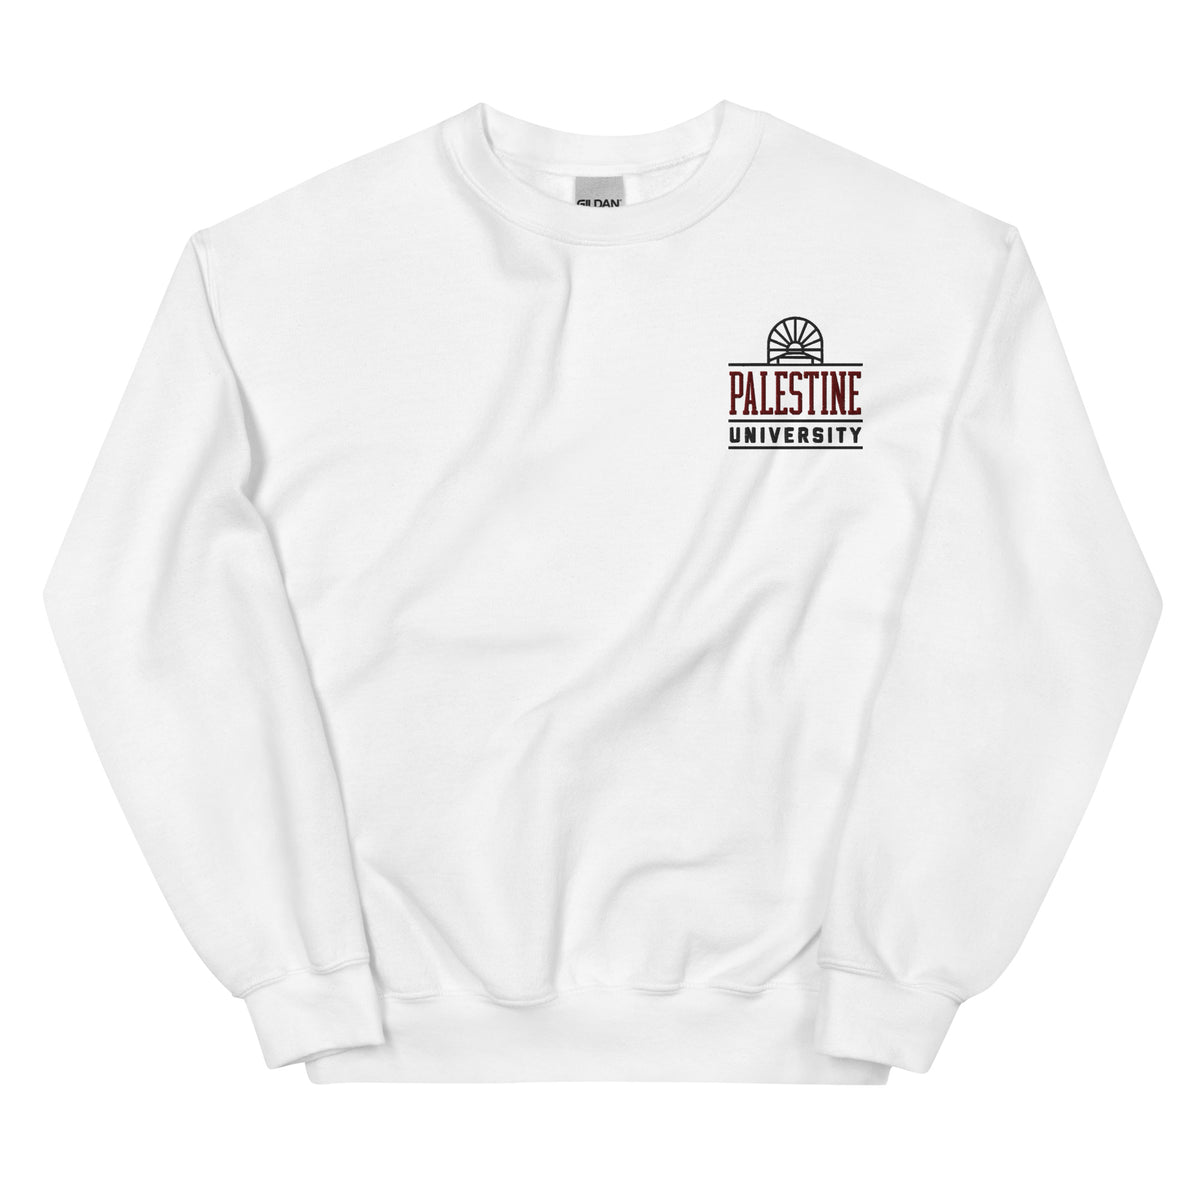 Palestine University classic sweatshirt in white by Dar Collective